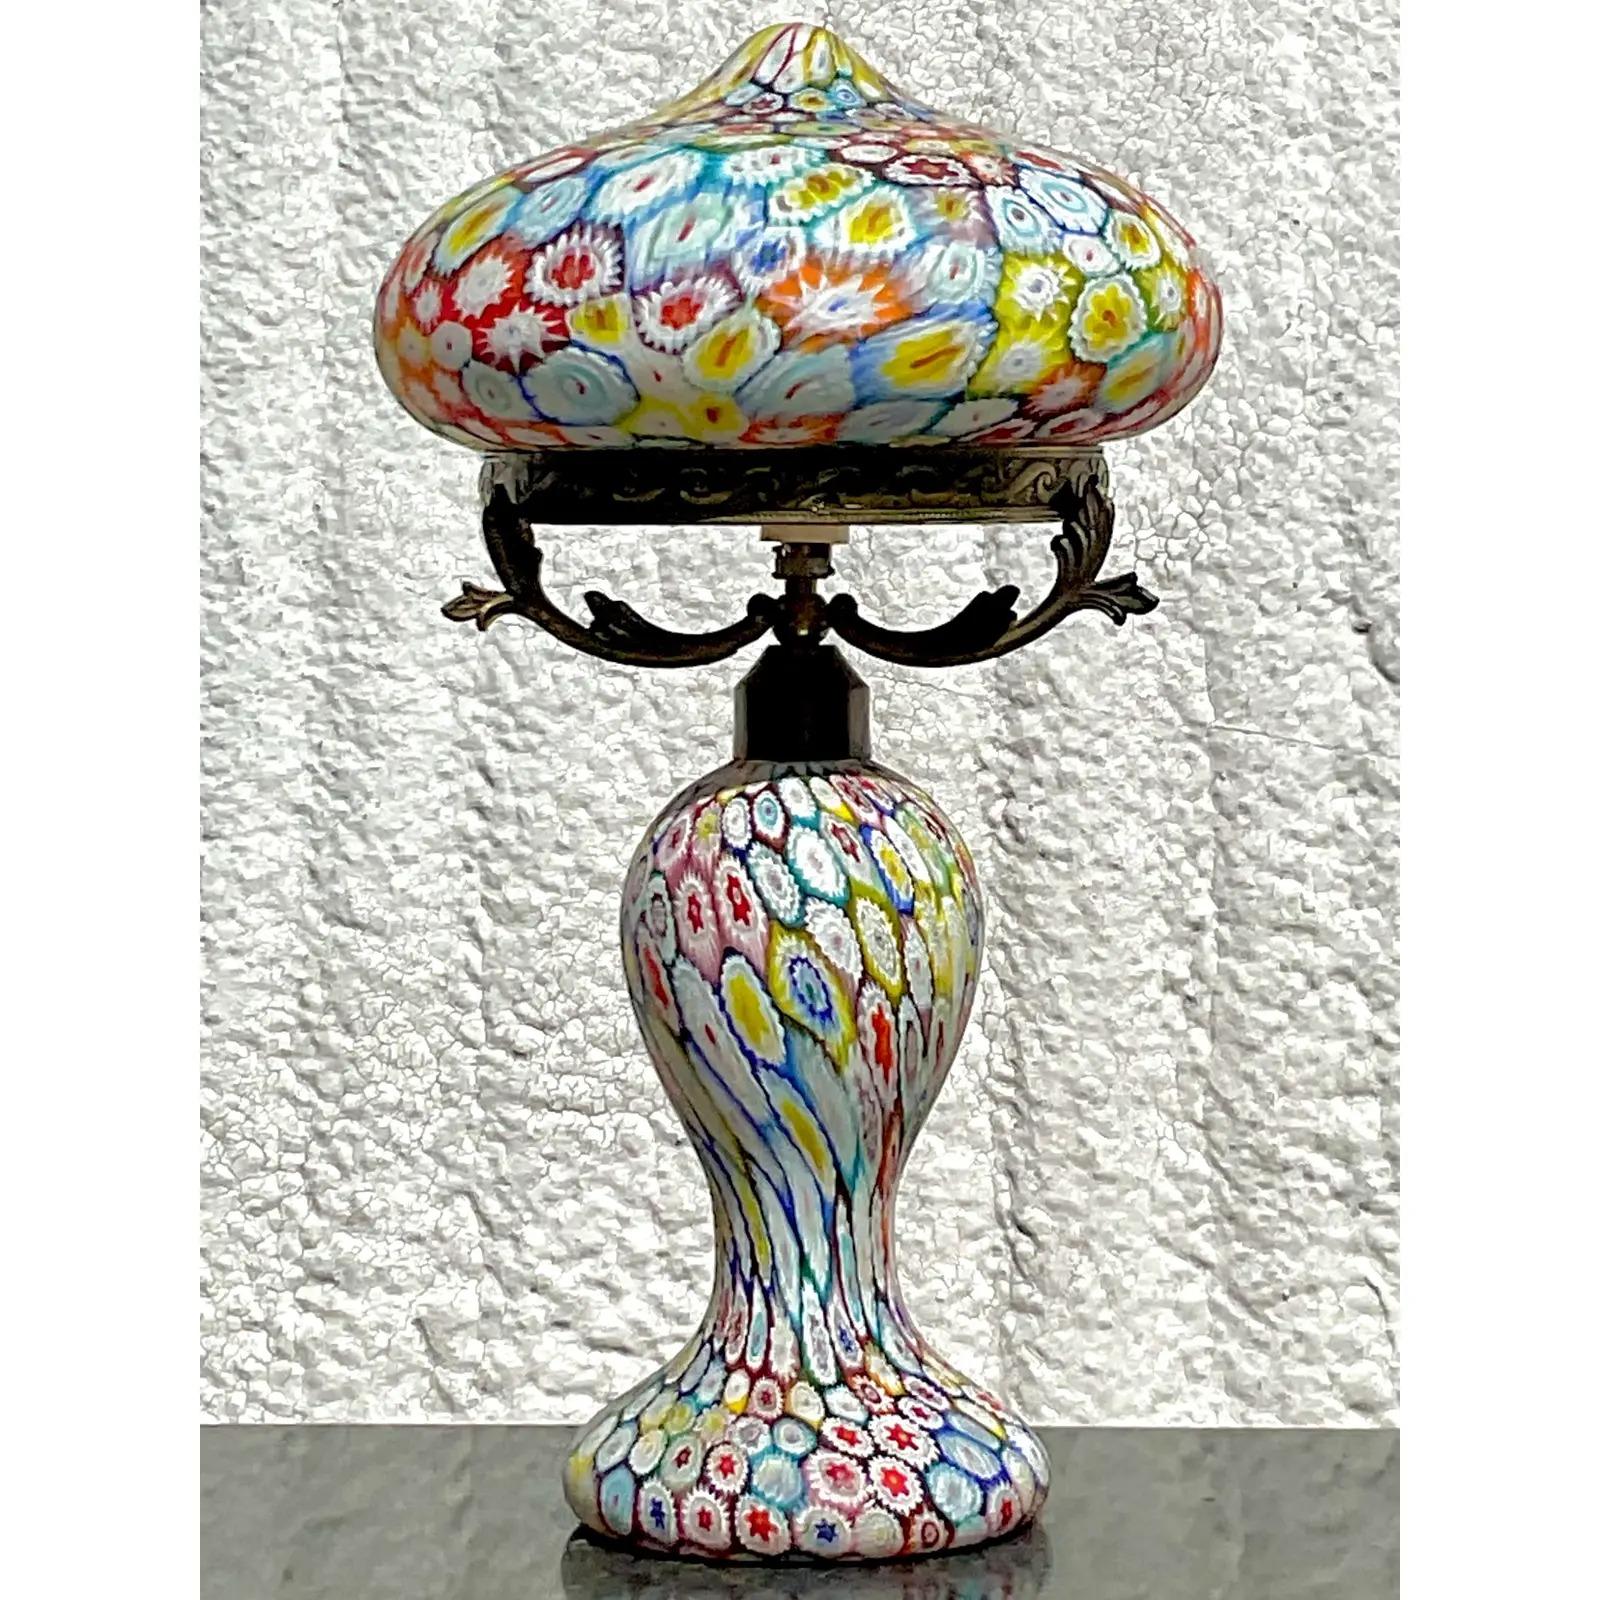 Vintage Italian glass table lamp. The iconic Fratelli Toso Millefiore Mushroom lamp. Brilliant colors in a lantern shape. Tagged on the bottom. Acquired from a Palm Beach estate.